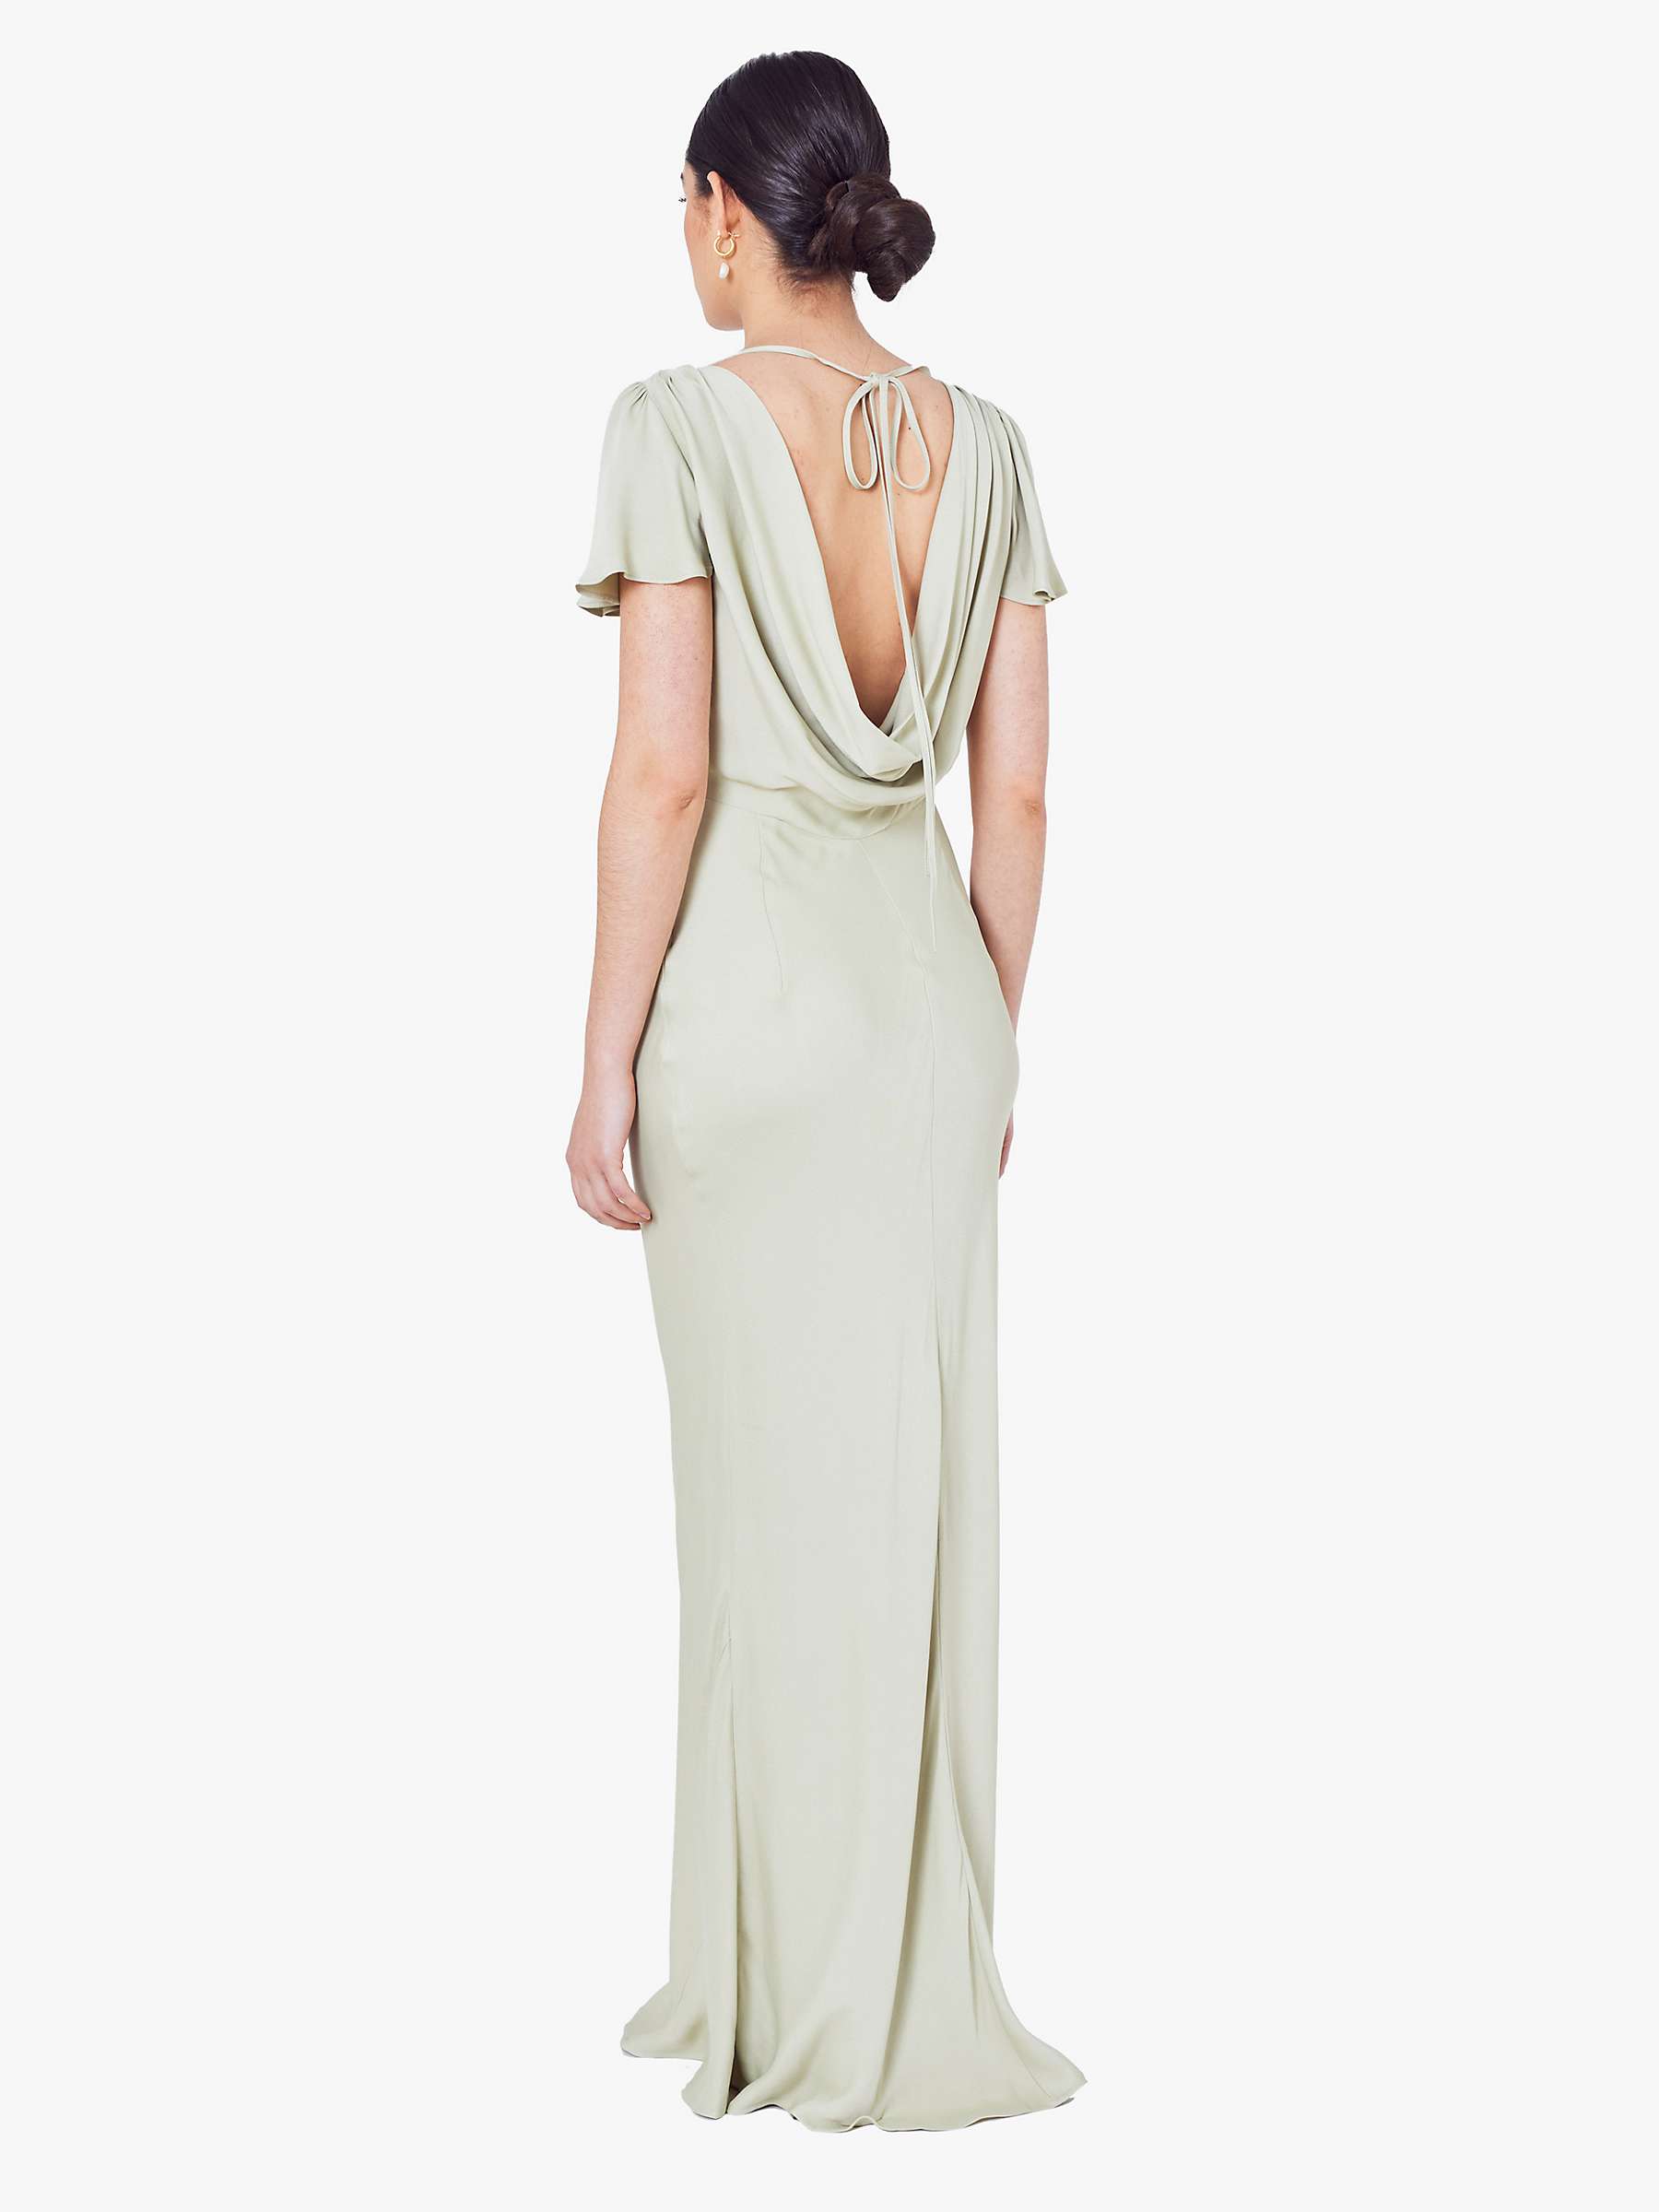 Buy Maids to Measure Eadie Empire Line Maxi Dress Online at johnlewis.com